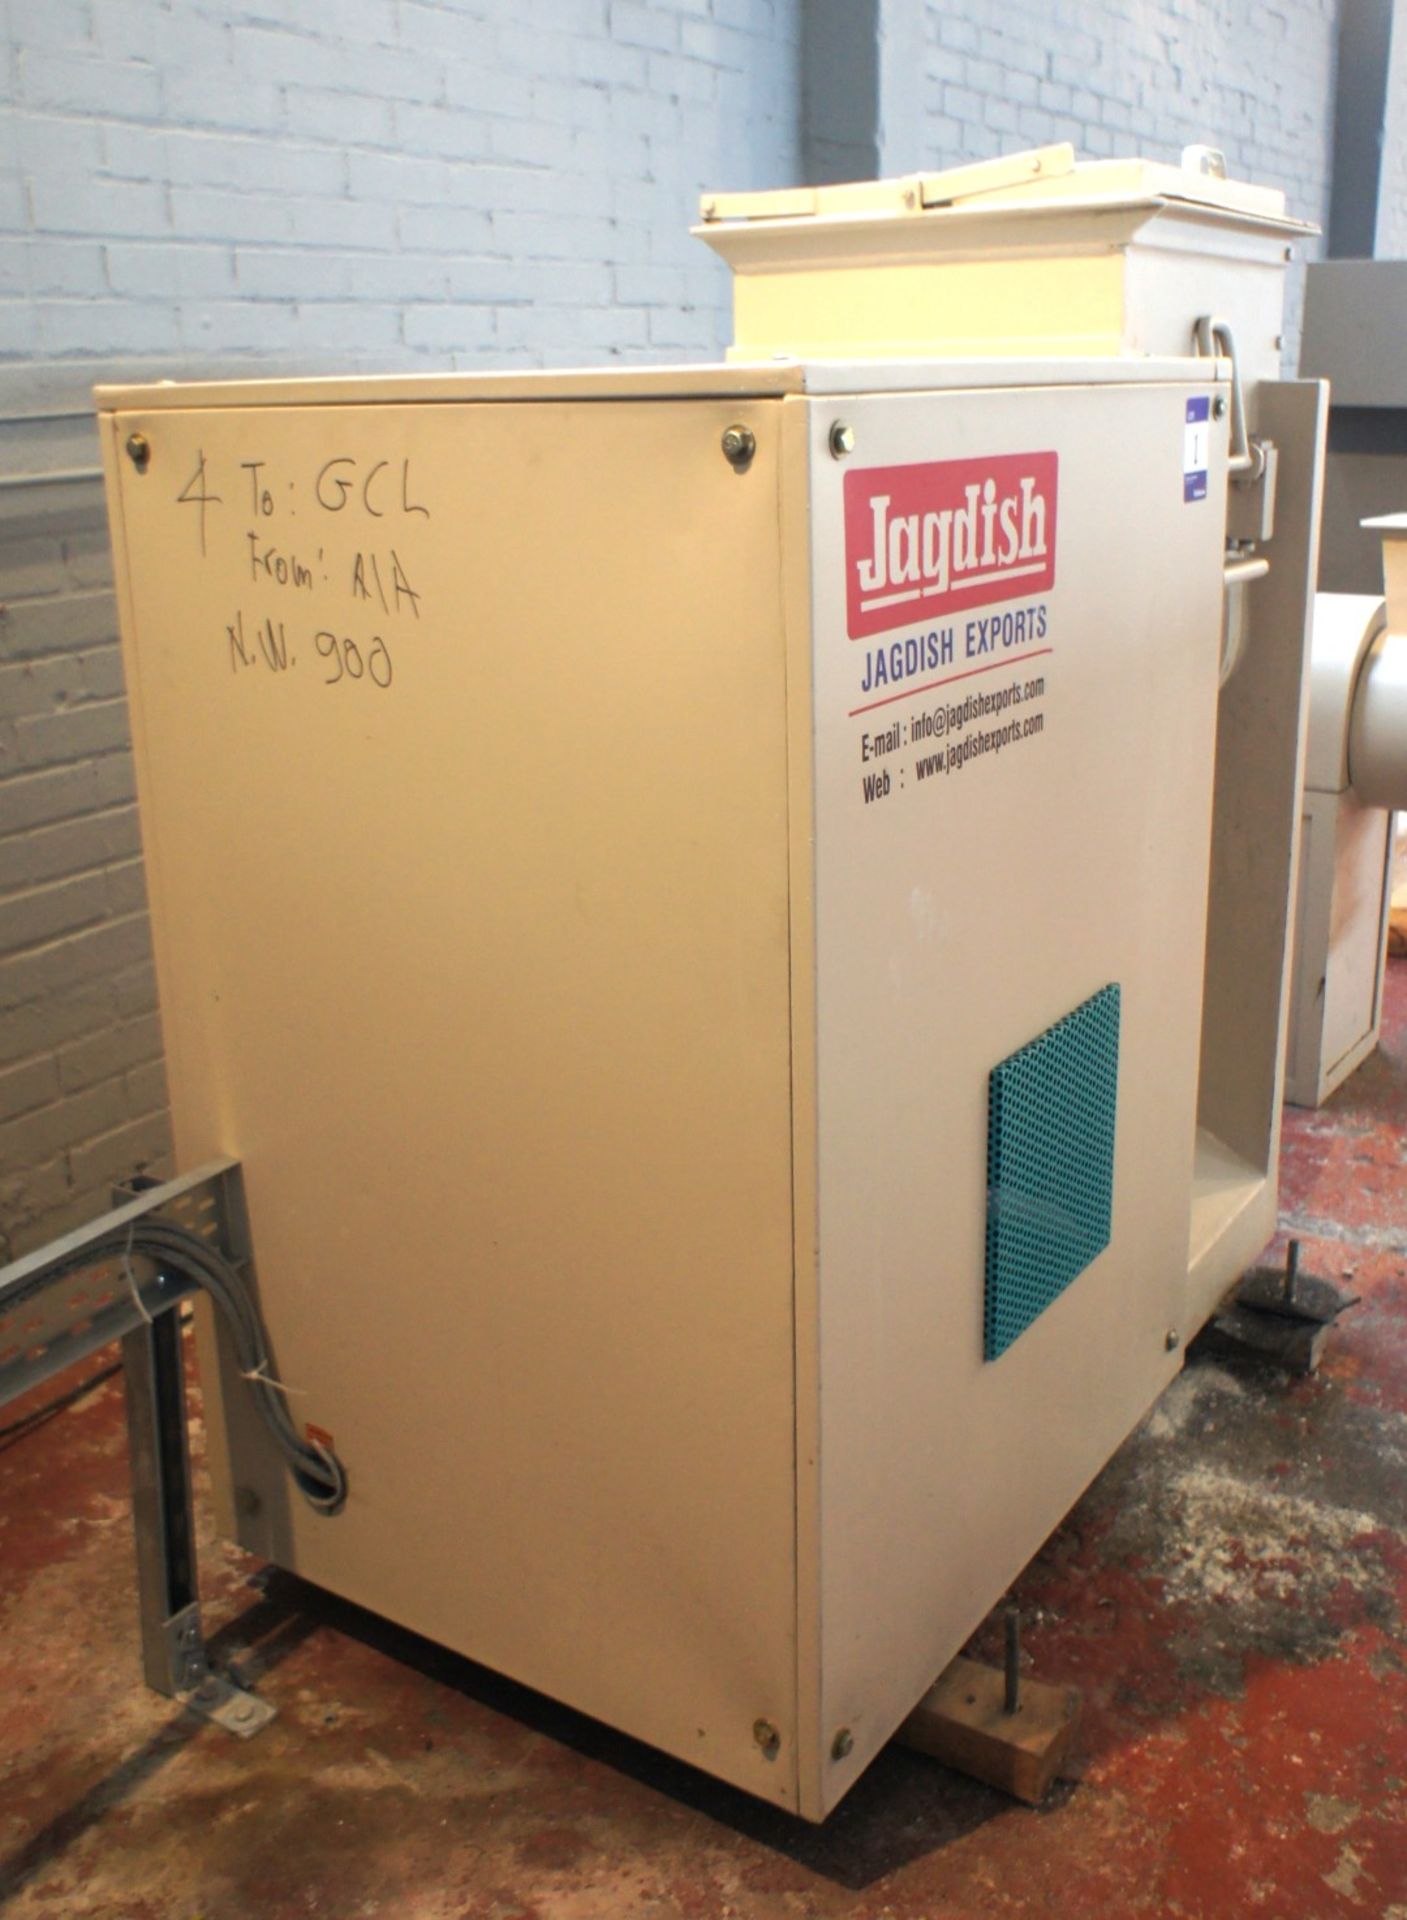 GCL Toilet Soap Plant with capacity of 3 tons/day (125Kg/hour) with: Caustic Lay Tank, - Image 25 of 47